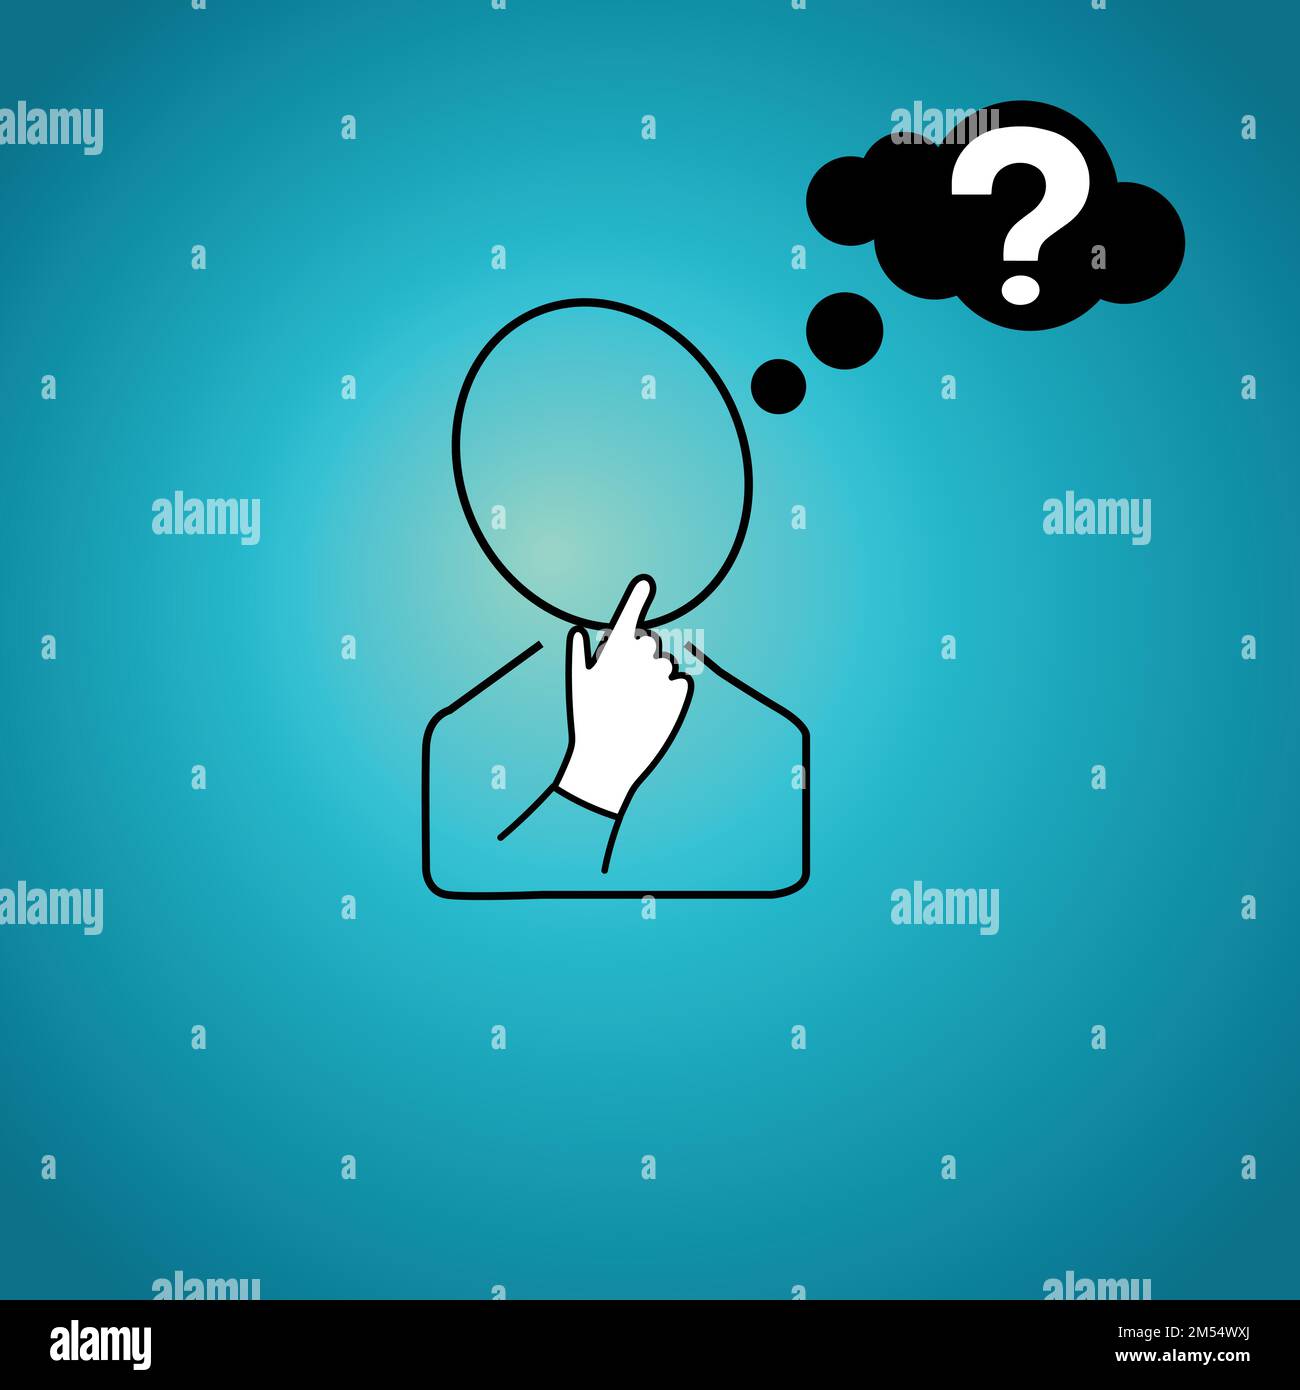 Icon of a man thinking with question mark on thought bubble Stock Vector